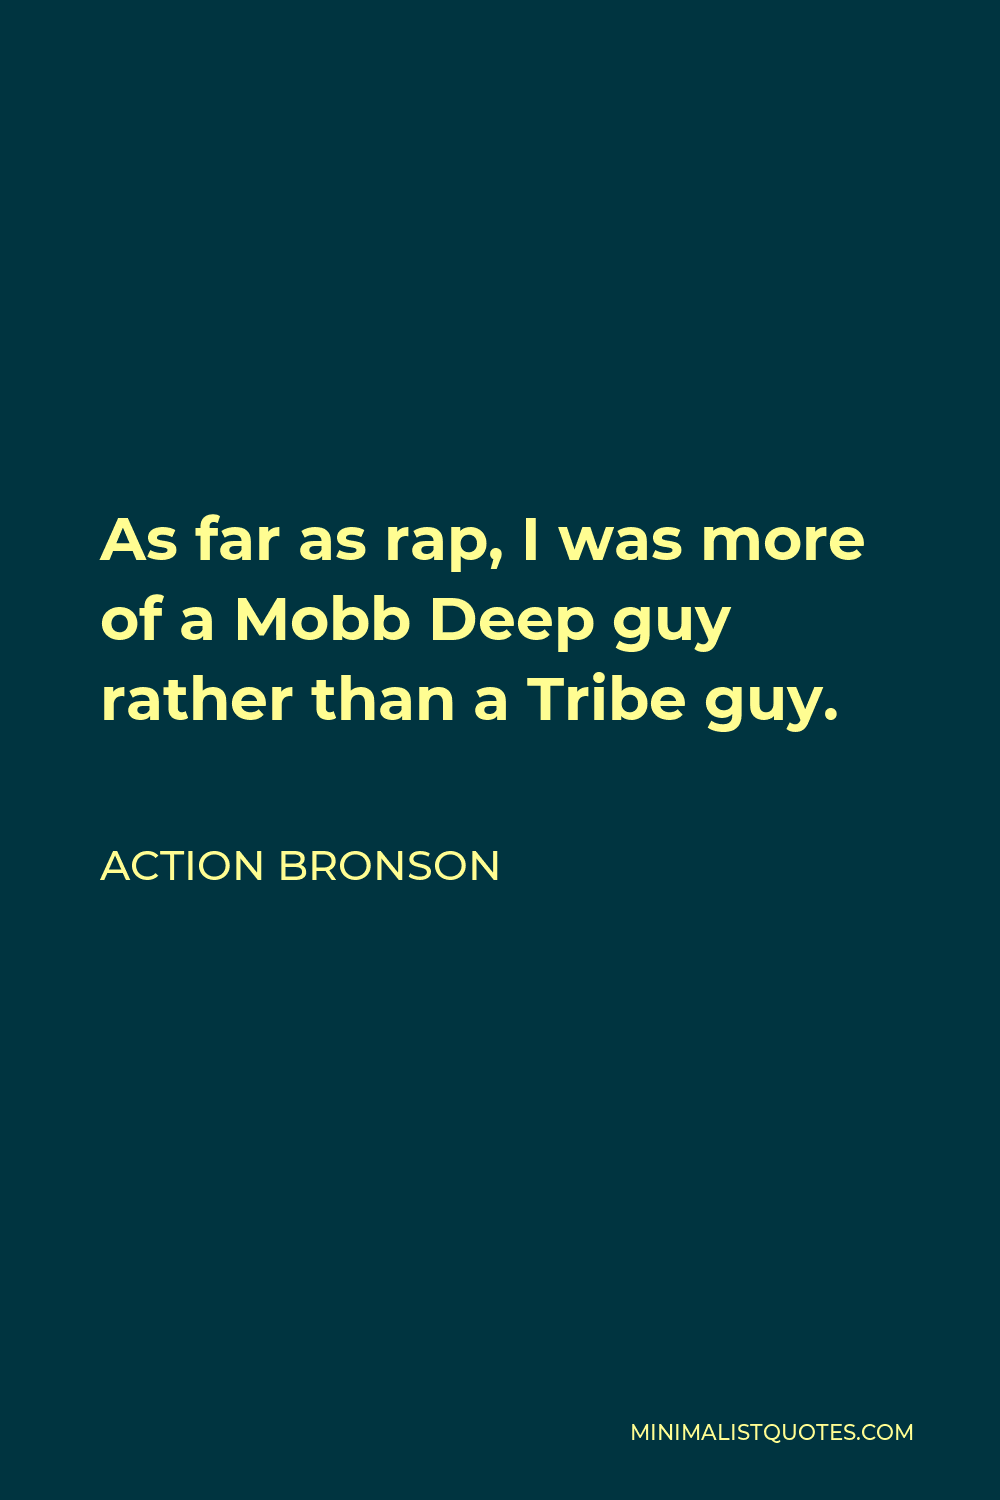 Action Bronson Quote - As far as rap, I was more of a Mobb Deep guy rather than a Tribe guy.